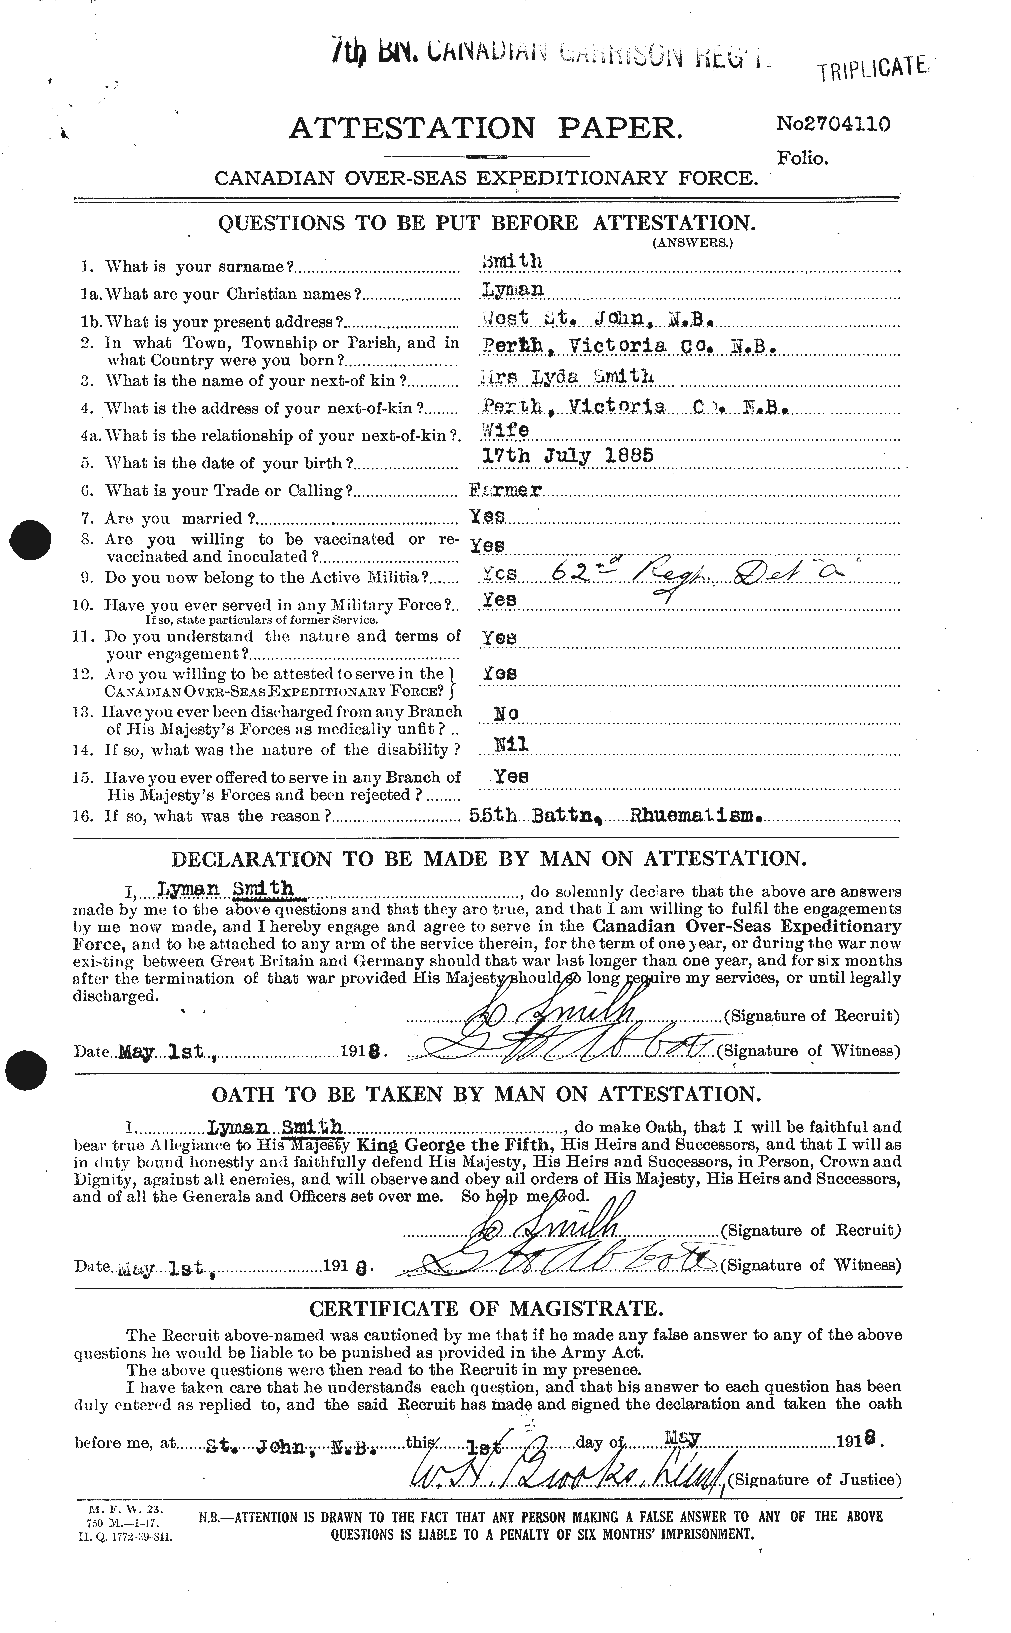 Personnel Records of the First World War - CEF 104807a